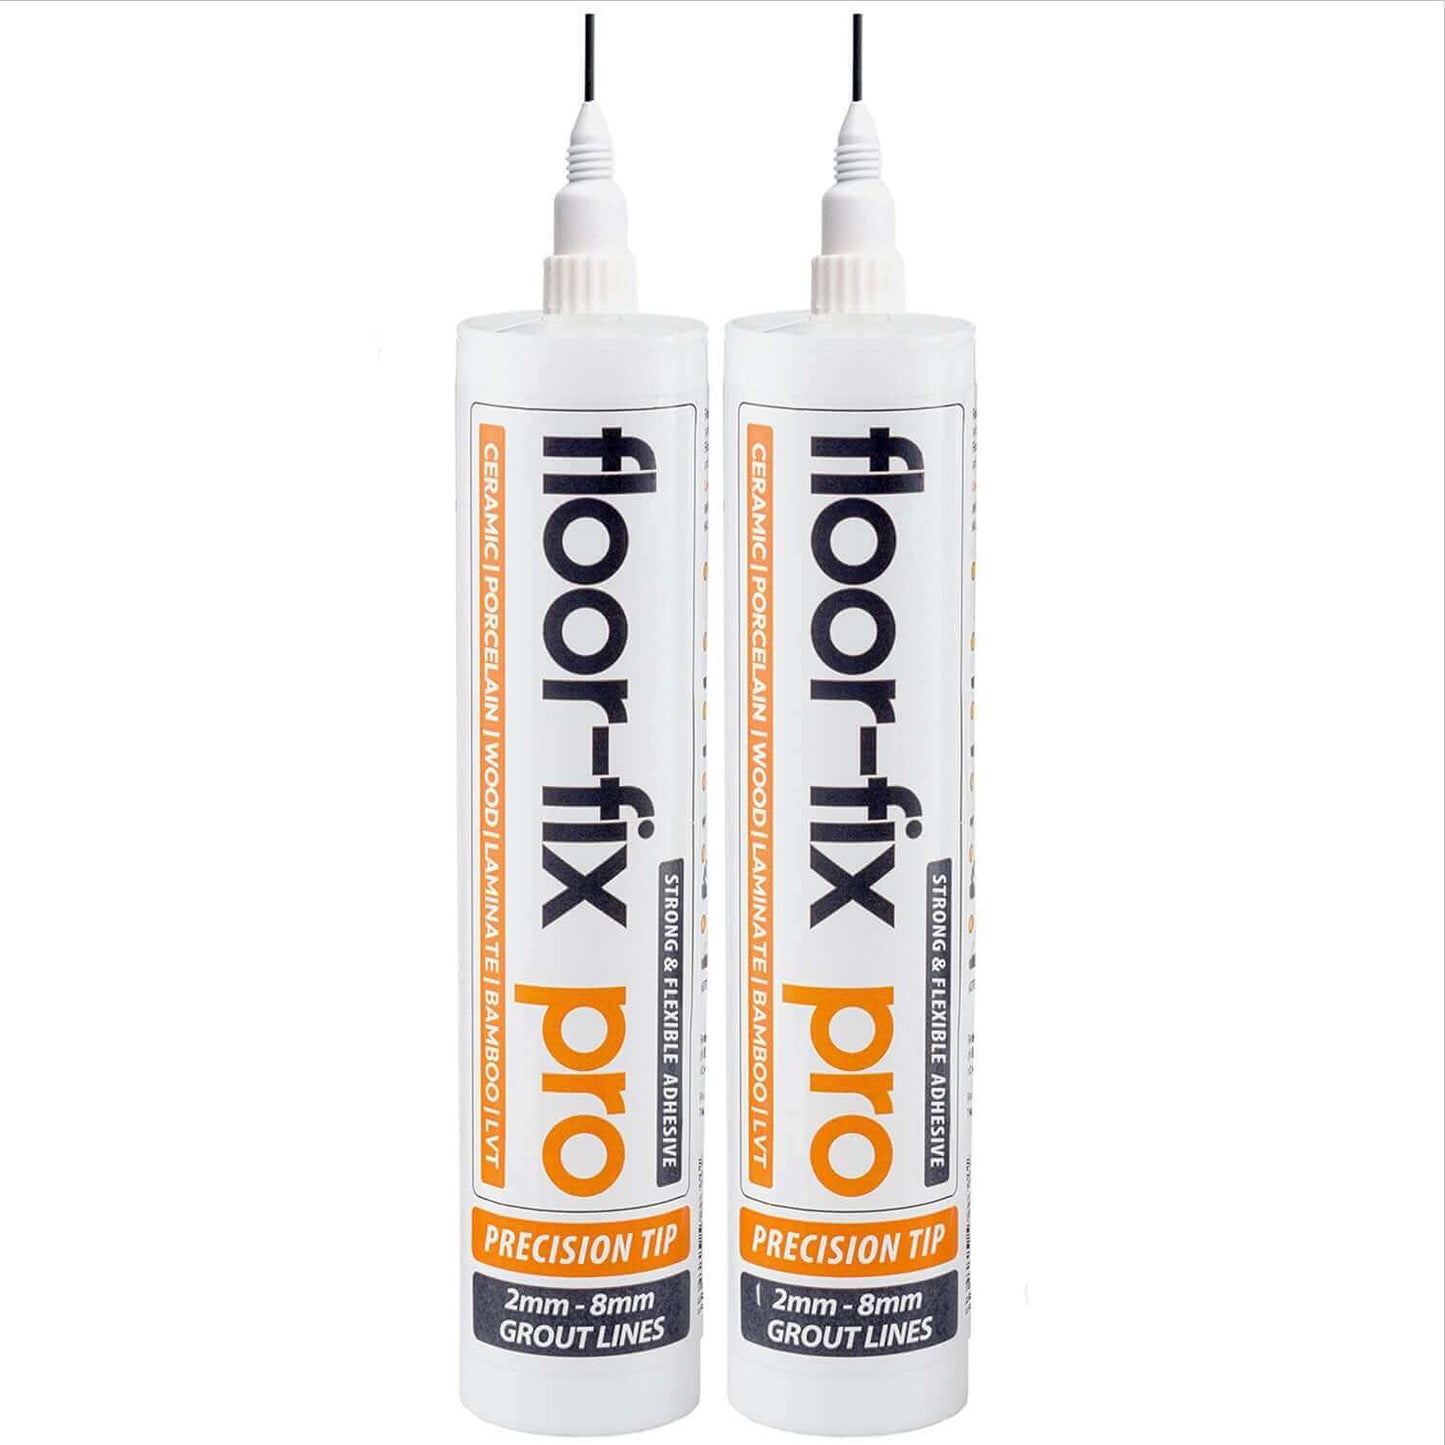 Floor Fix Pro Floor-Fix Pro 300ml -Fix Loose Tiles & Hollow Wood Floors Floor-Fix Pro is a super strength, low viscosity bonding adhesive for repairing loose or hollow tiles and creaky wood floors. To fix loose tiles simply drill a hole in the grout lines